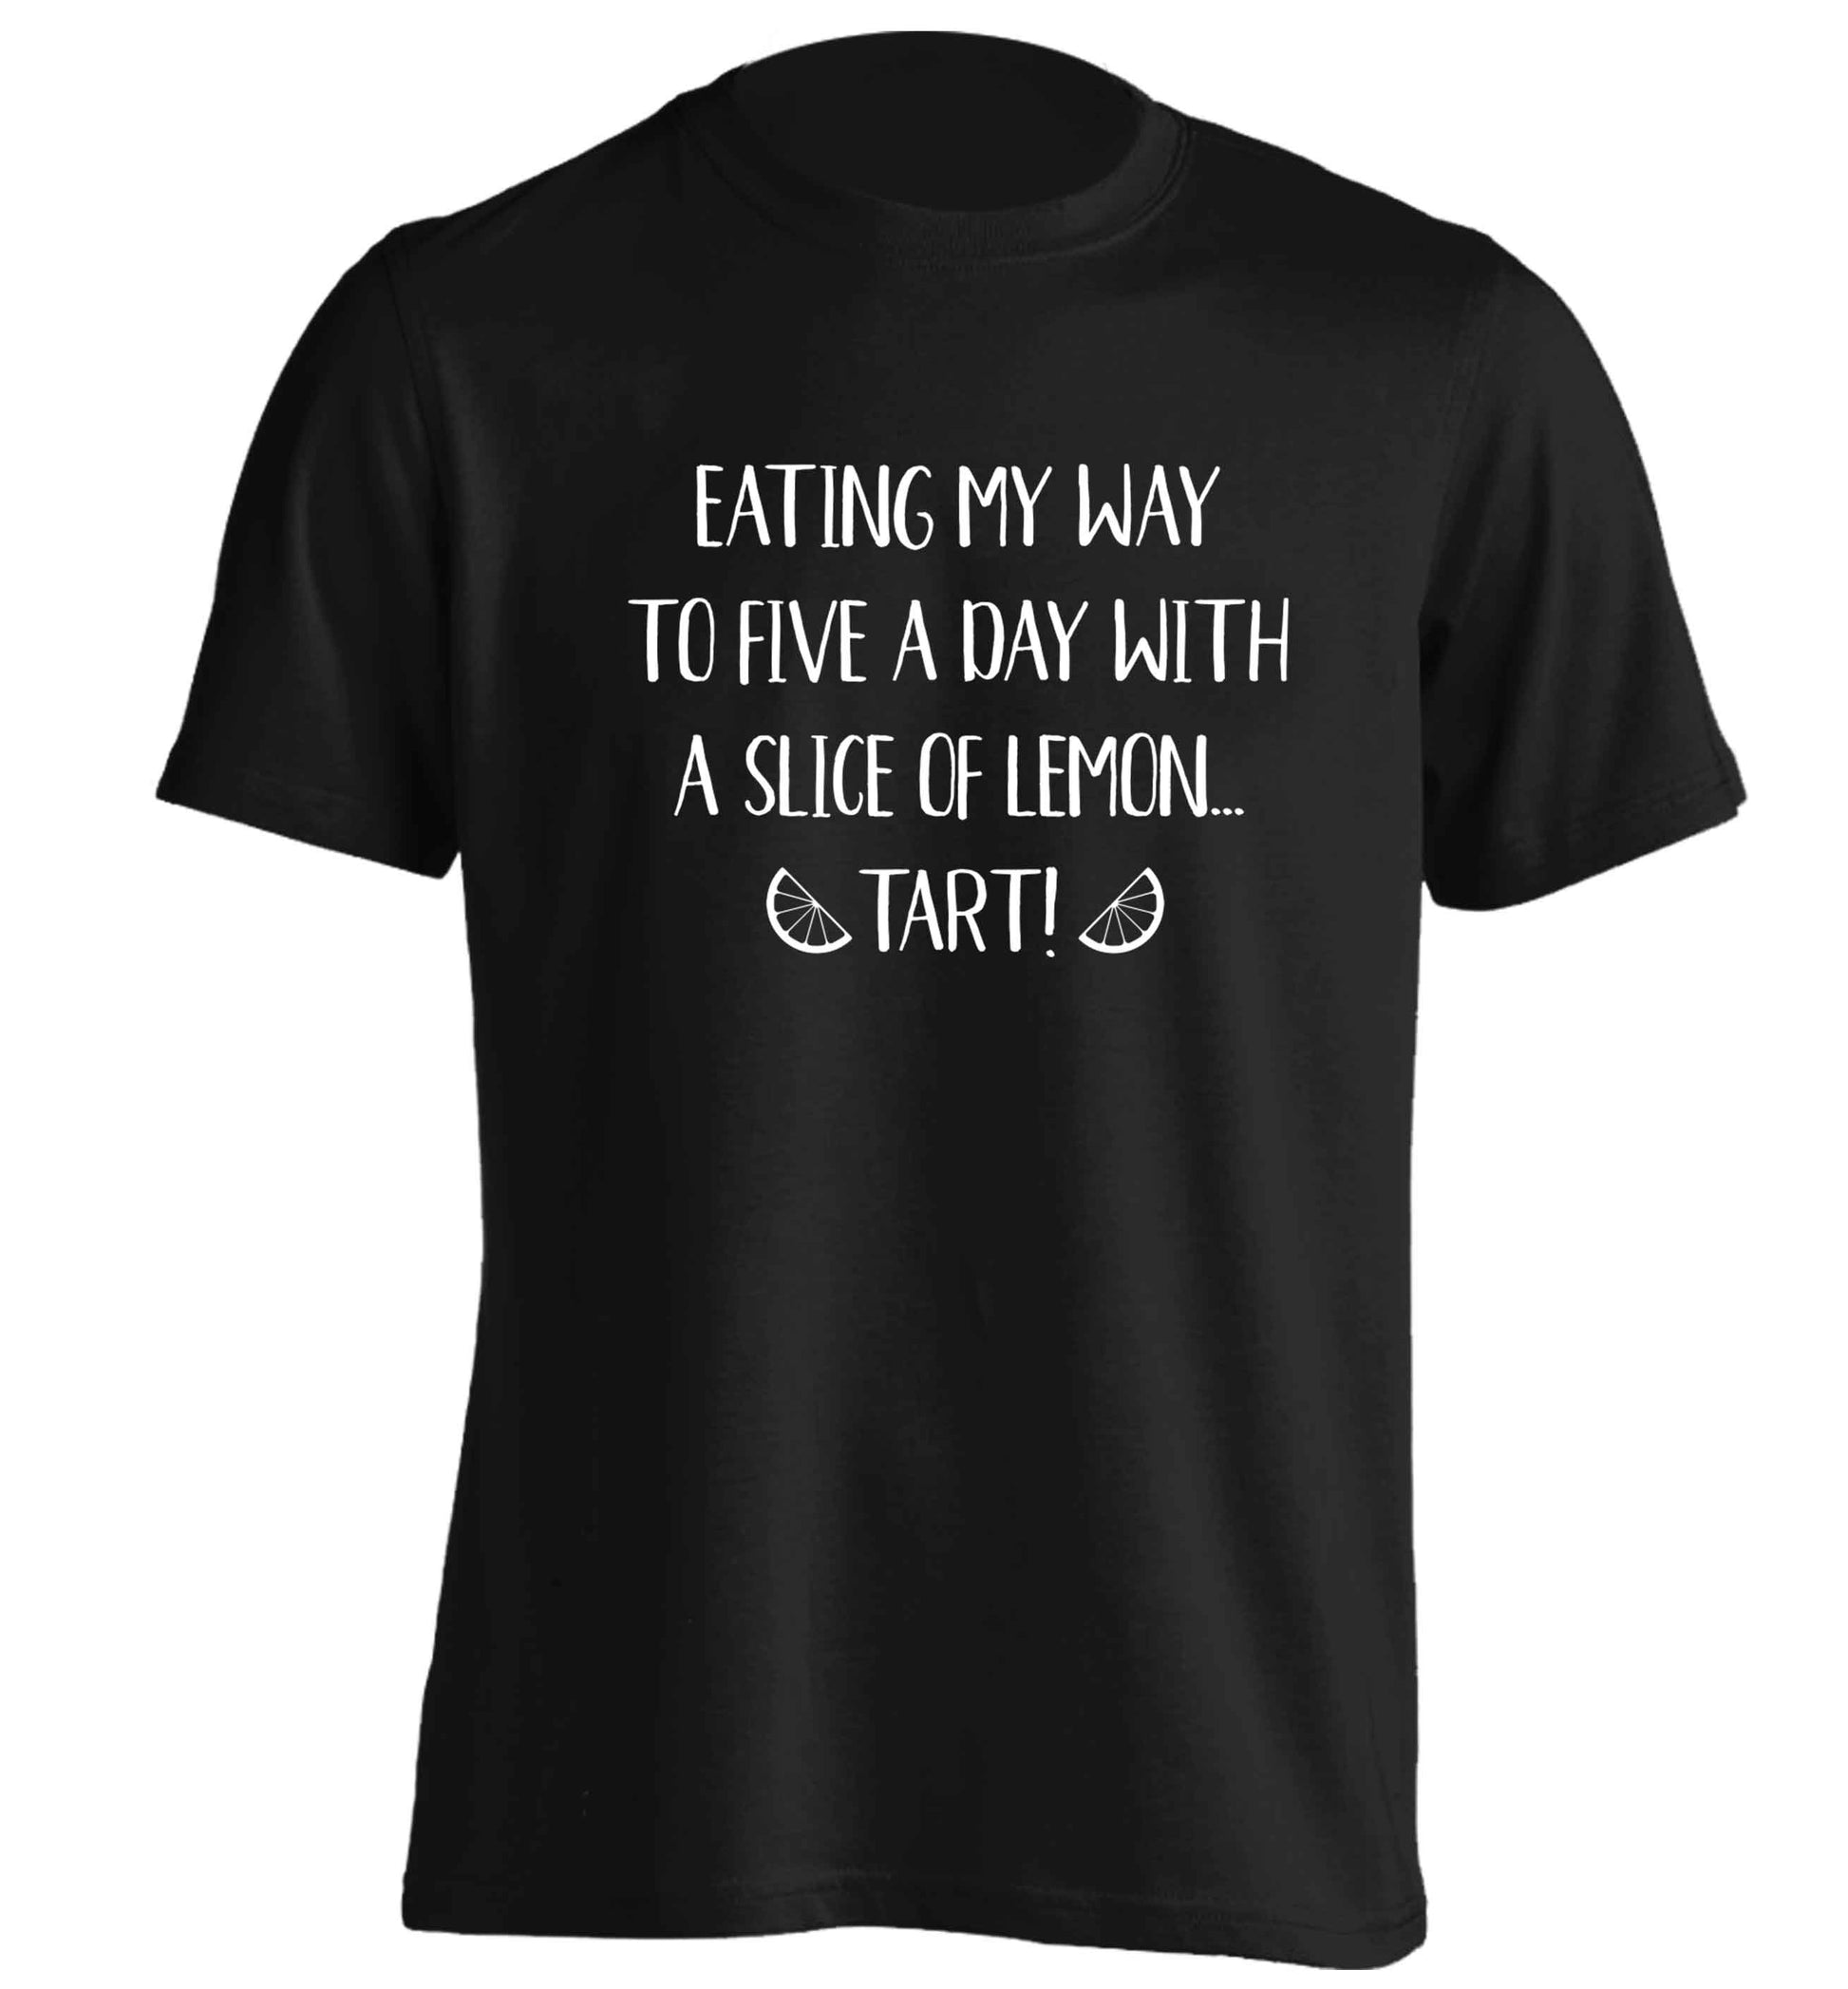 Eating my way to five a day with a slice of lemon tart adults unisex black Tshirt 2XL